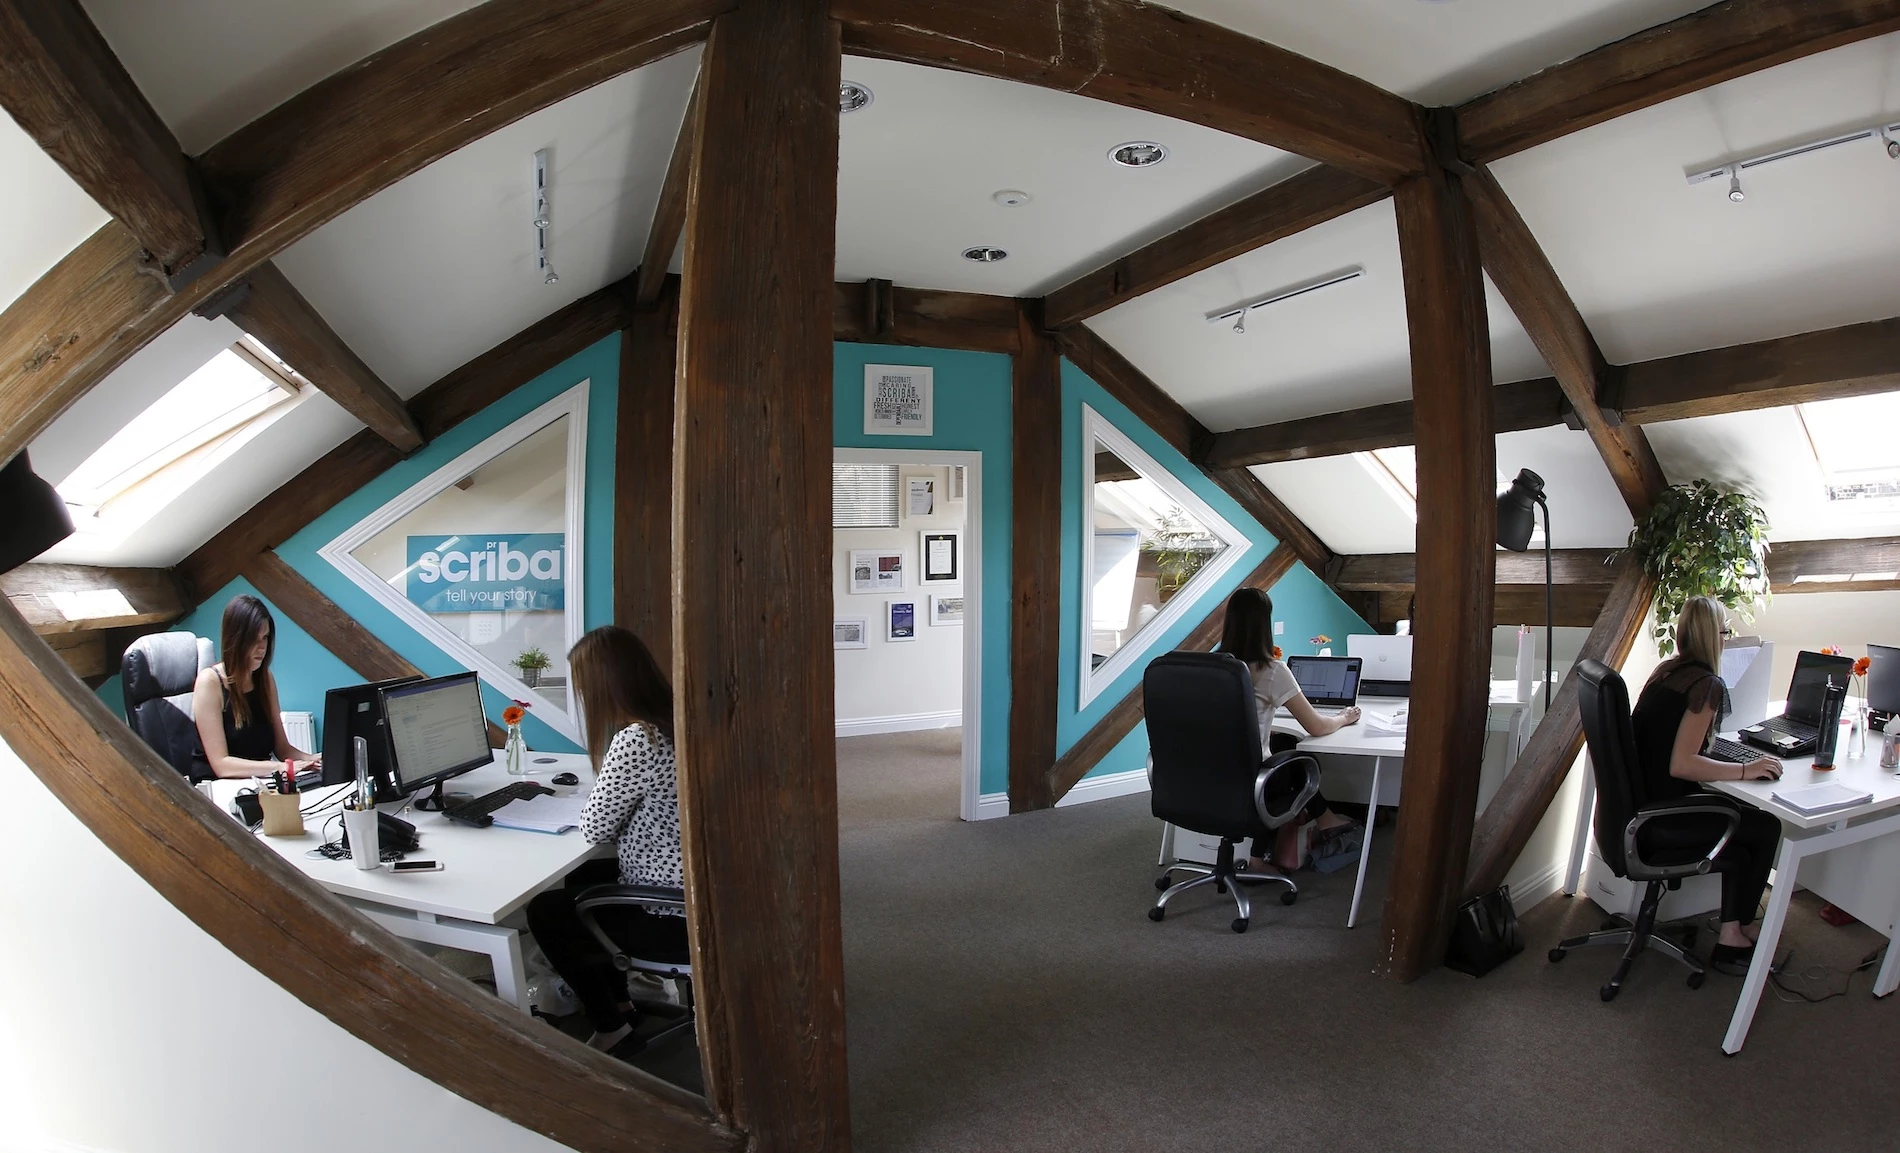 Scriba PR has relocated to a loft within Heritage Exchange in Lindley.